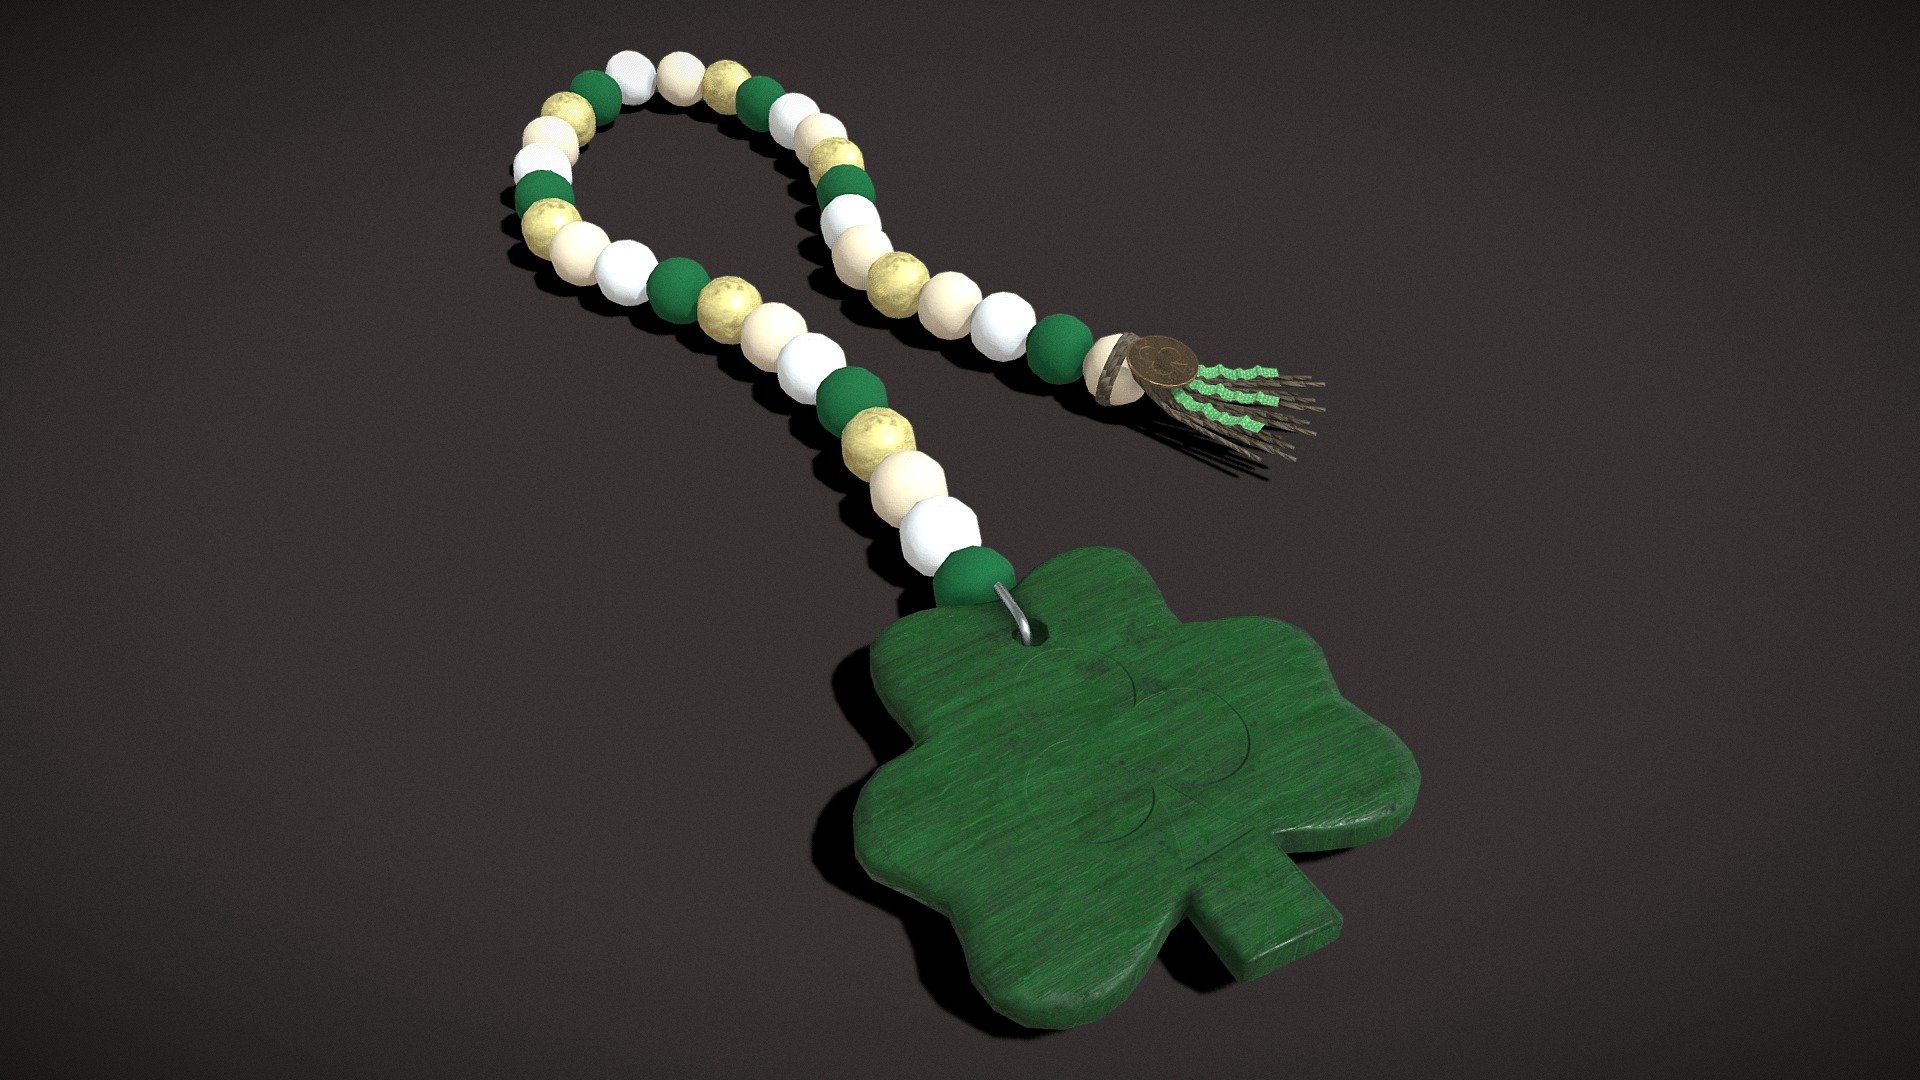 St_Patrick_Bead_Trinket FBX 3D Model VR / AR / Low-poly
PBR approved
Geometry Polygon mesh
Polygons 2,308
Vertices 2,242
Textures 4K PNG - St_Patrick_Bead_Trinket - Buy Royalty Free 3D model by GetDeadEntertainment 3d model